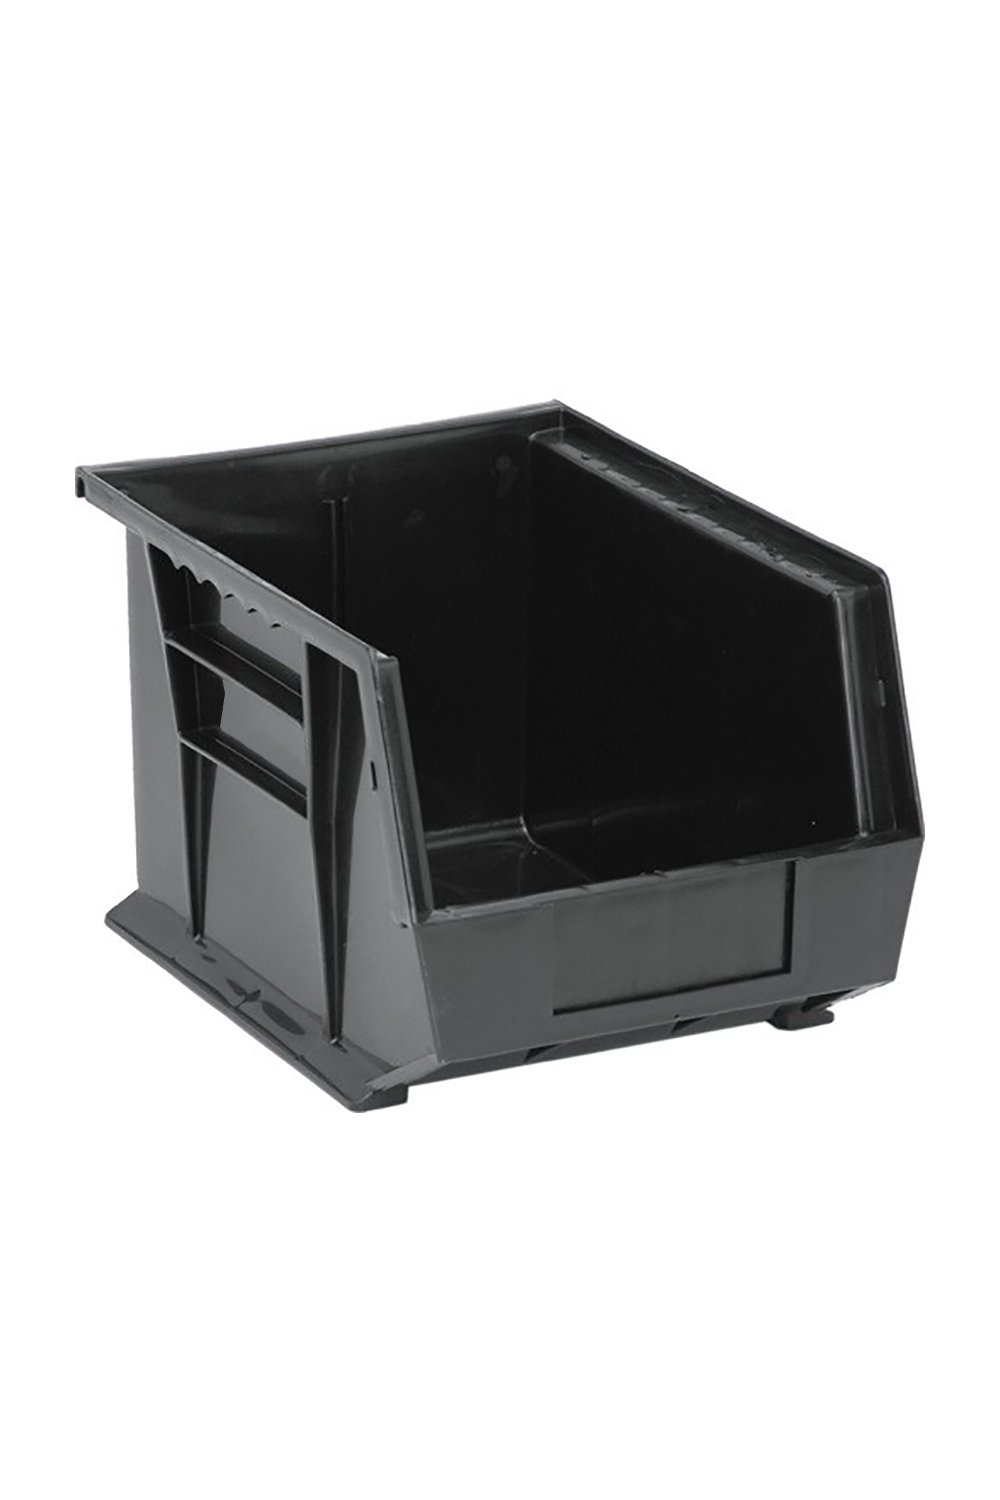 Recycled Ultra Hang and Stack Bin Bins & Containers Acart 10-3/4"L x 8-1/4"W x 7"H Black 